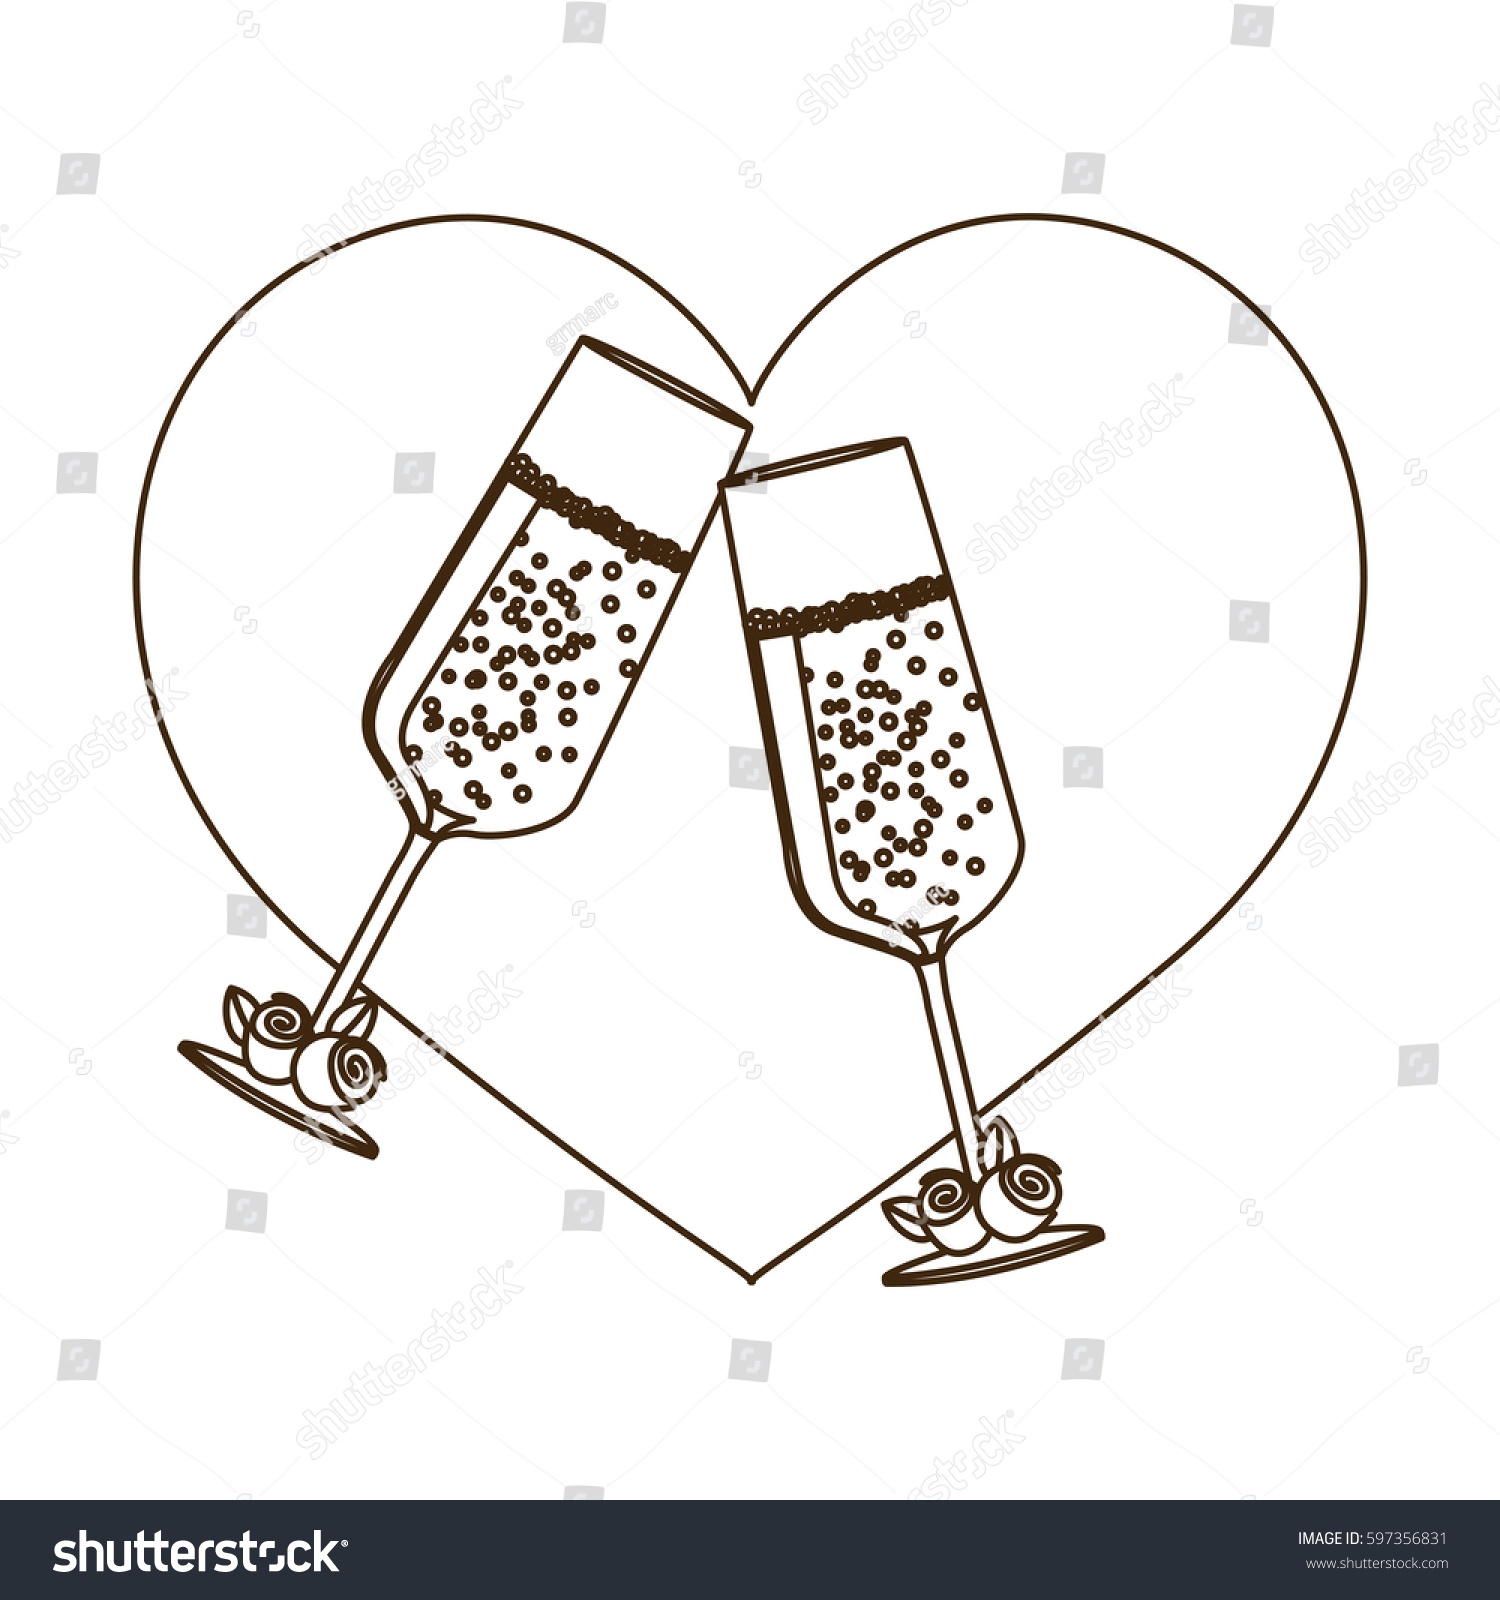 Silhouette Heart Toast Champagne Glasses Wedding Stock Vector Royalty Free 597356831